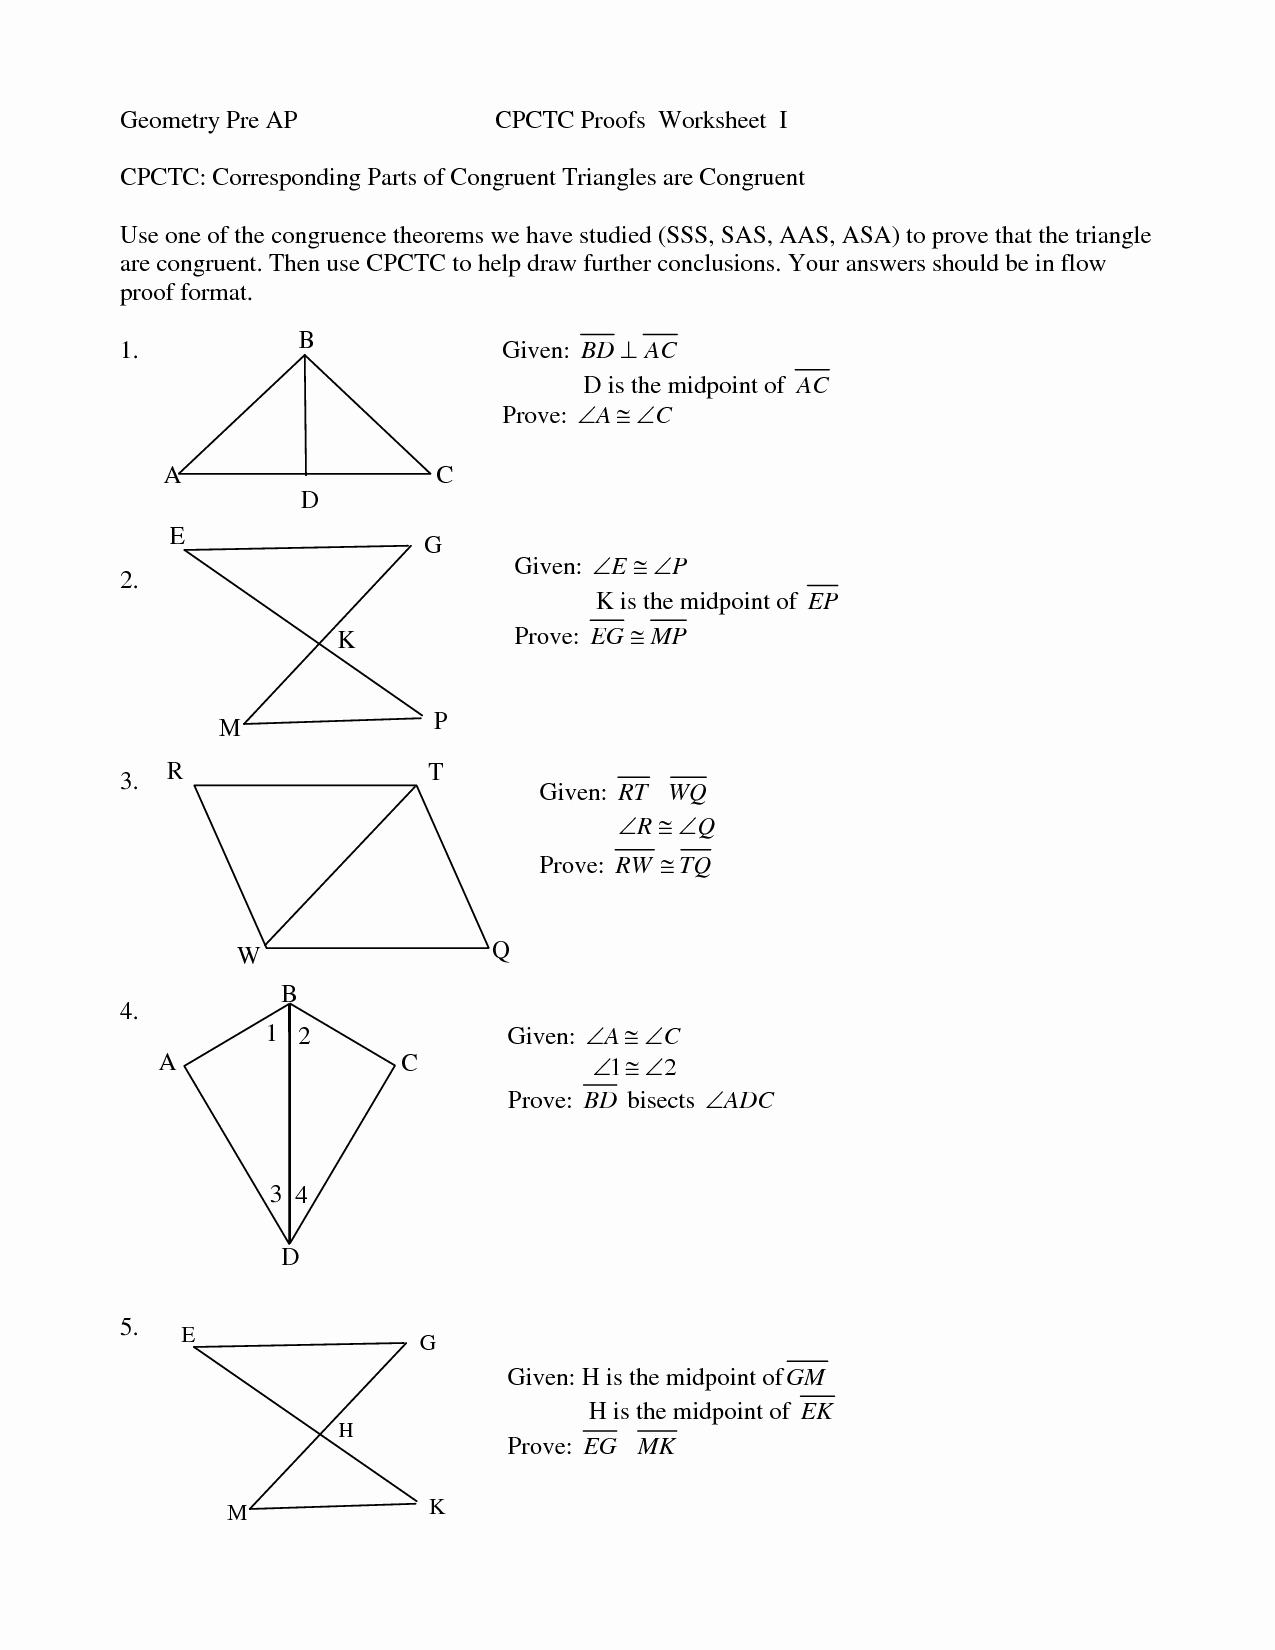 Geometry Worksheet Congruent Triangles Answers Best Of Geometry assignment Answers Reportz725 Web Fc2